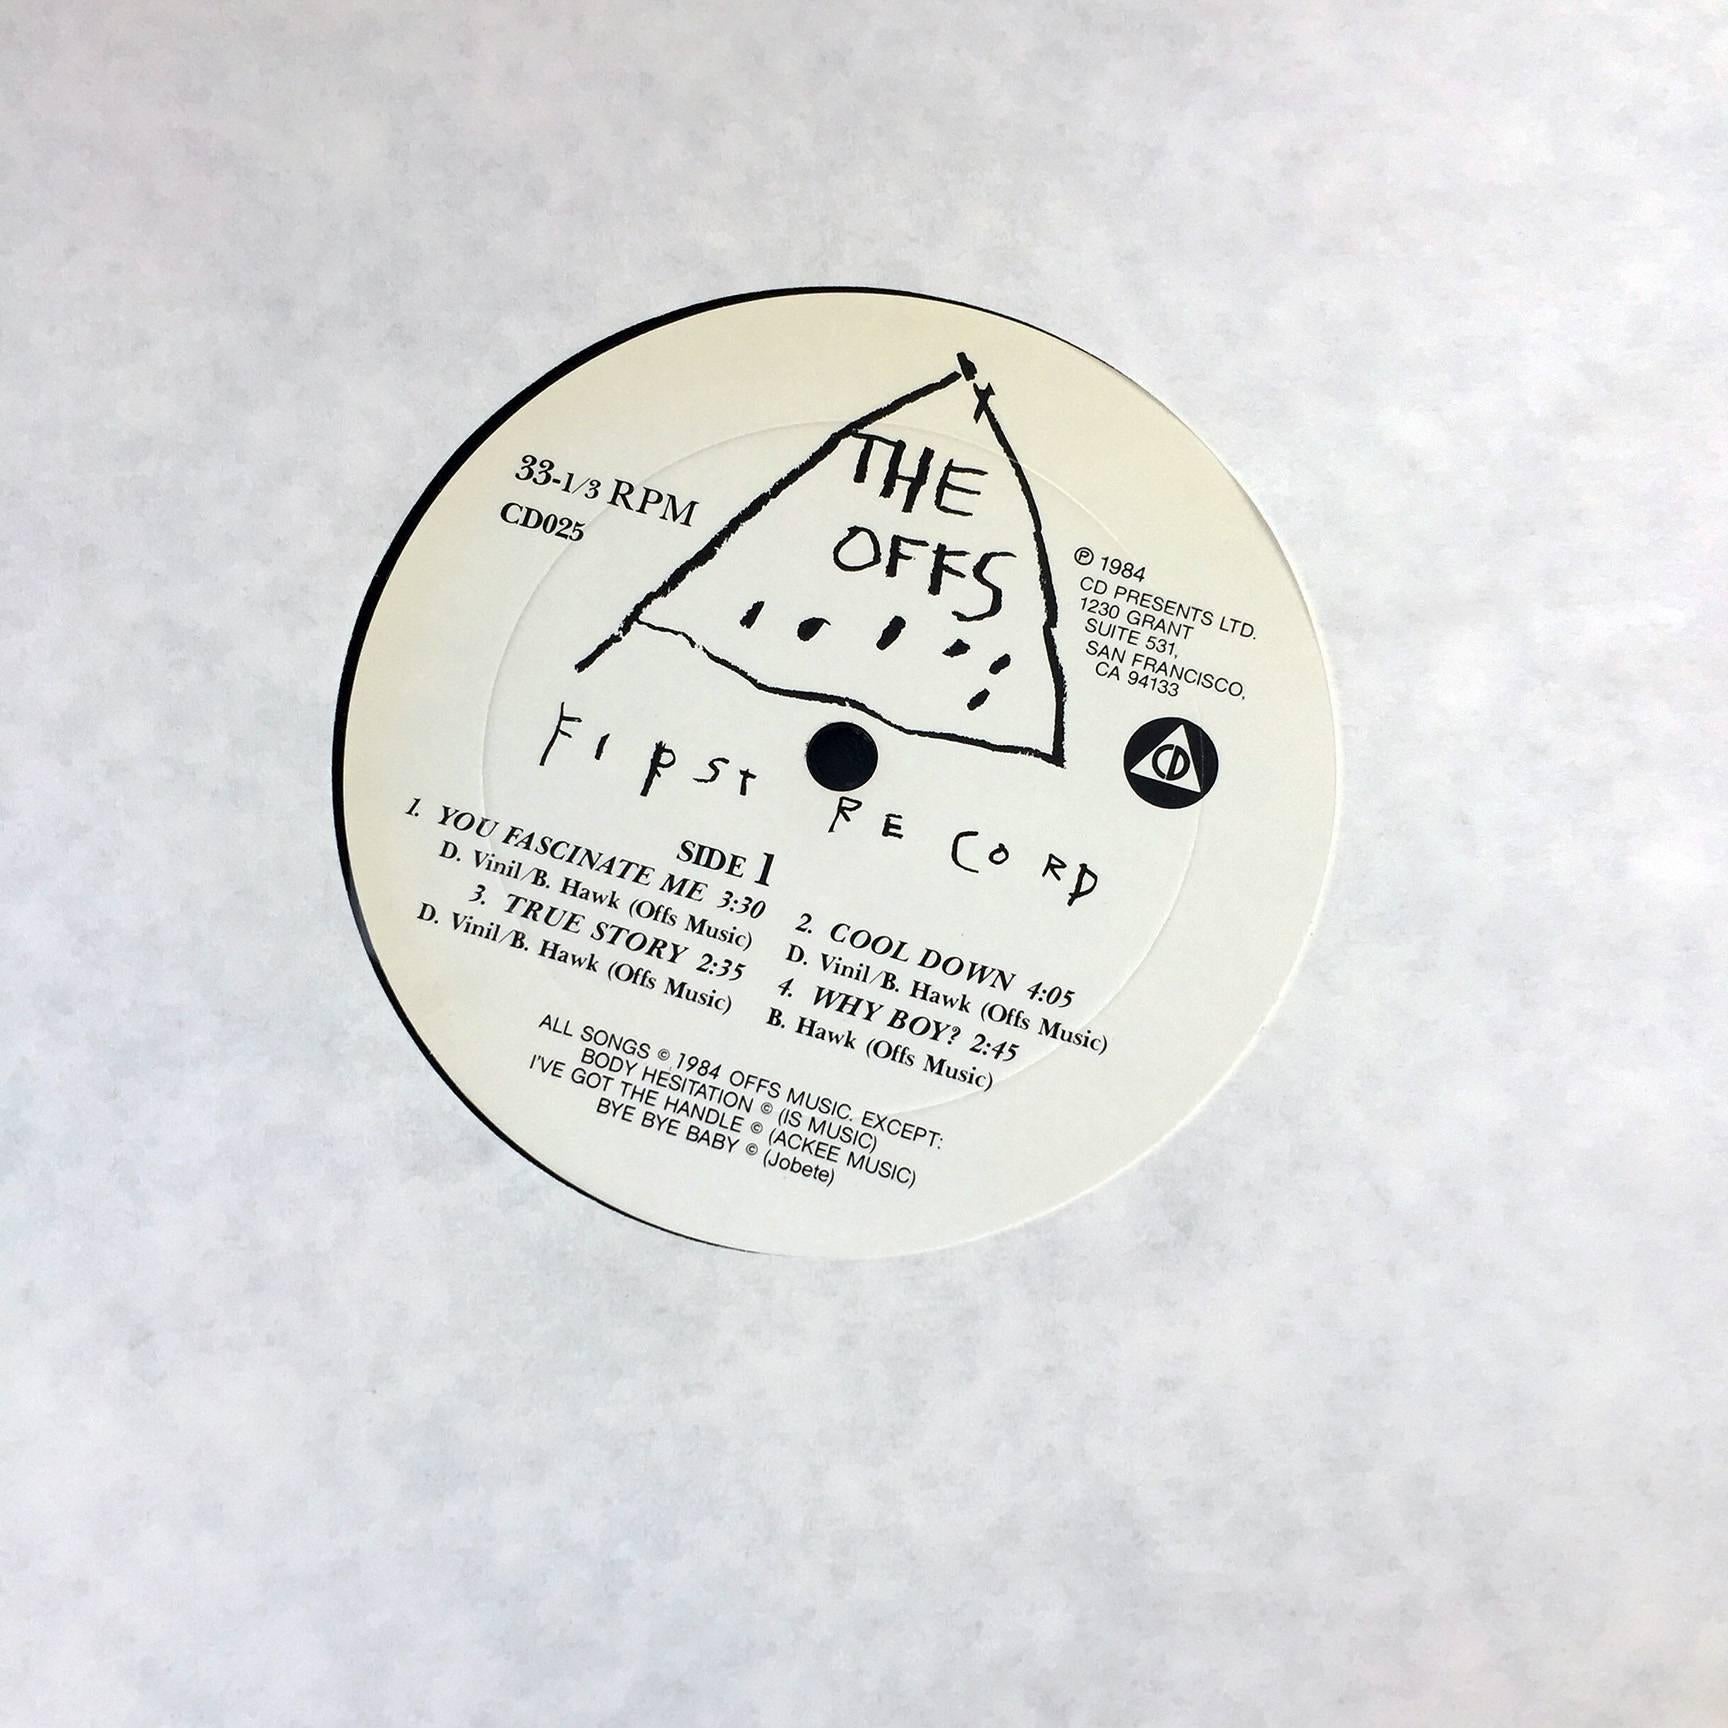 "The Offs: First Record" original first printing, 1984 featuring original offset artwork by Jean Michel Basquiat. This is from the original first edition, first printing/pressing produced during Basquiat's lifetime. Back cover displays